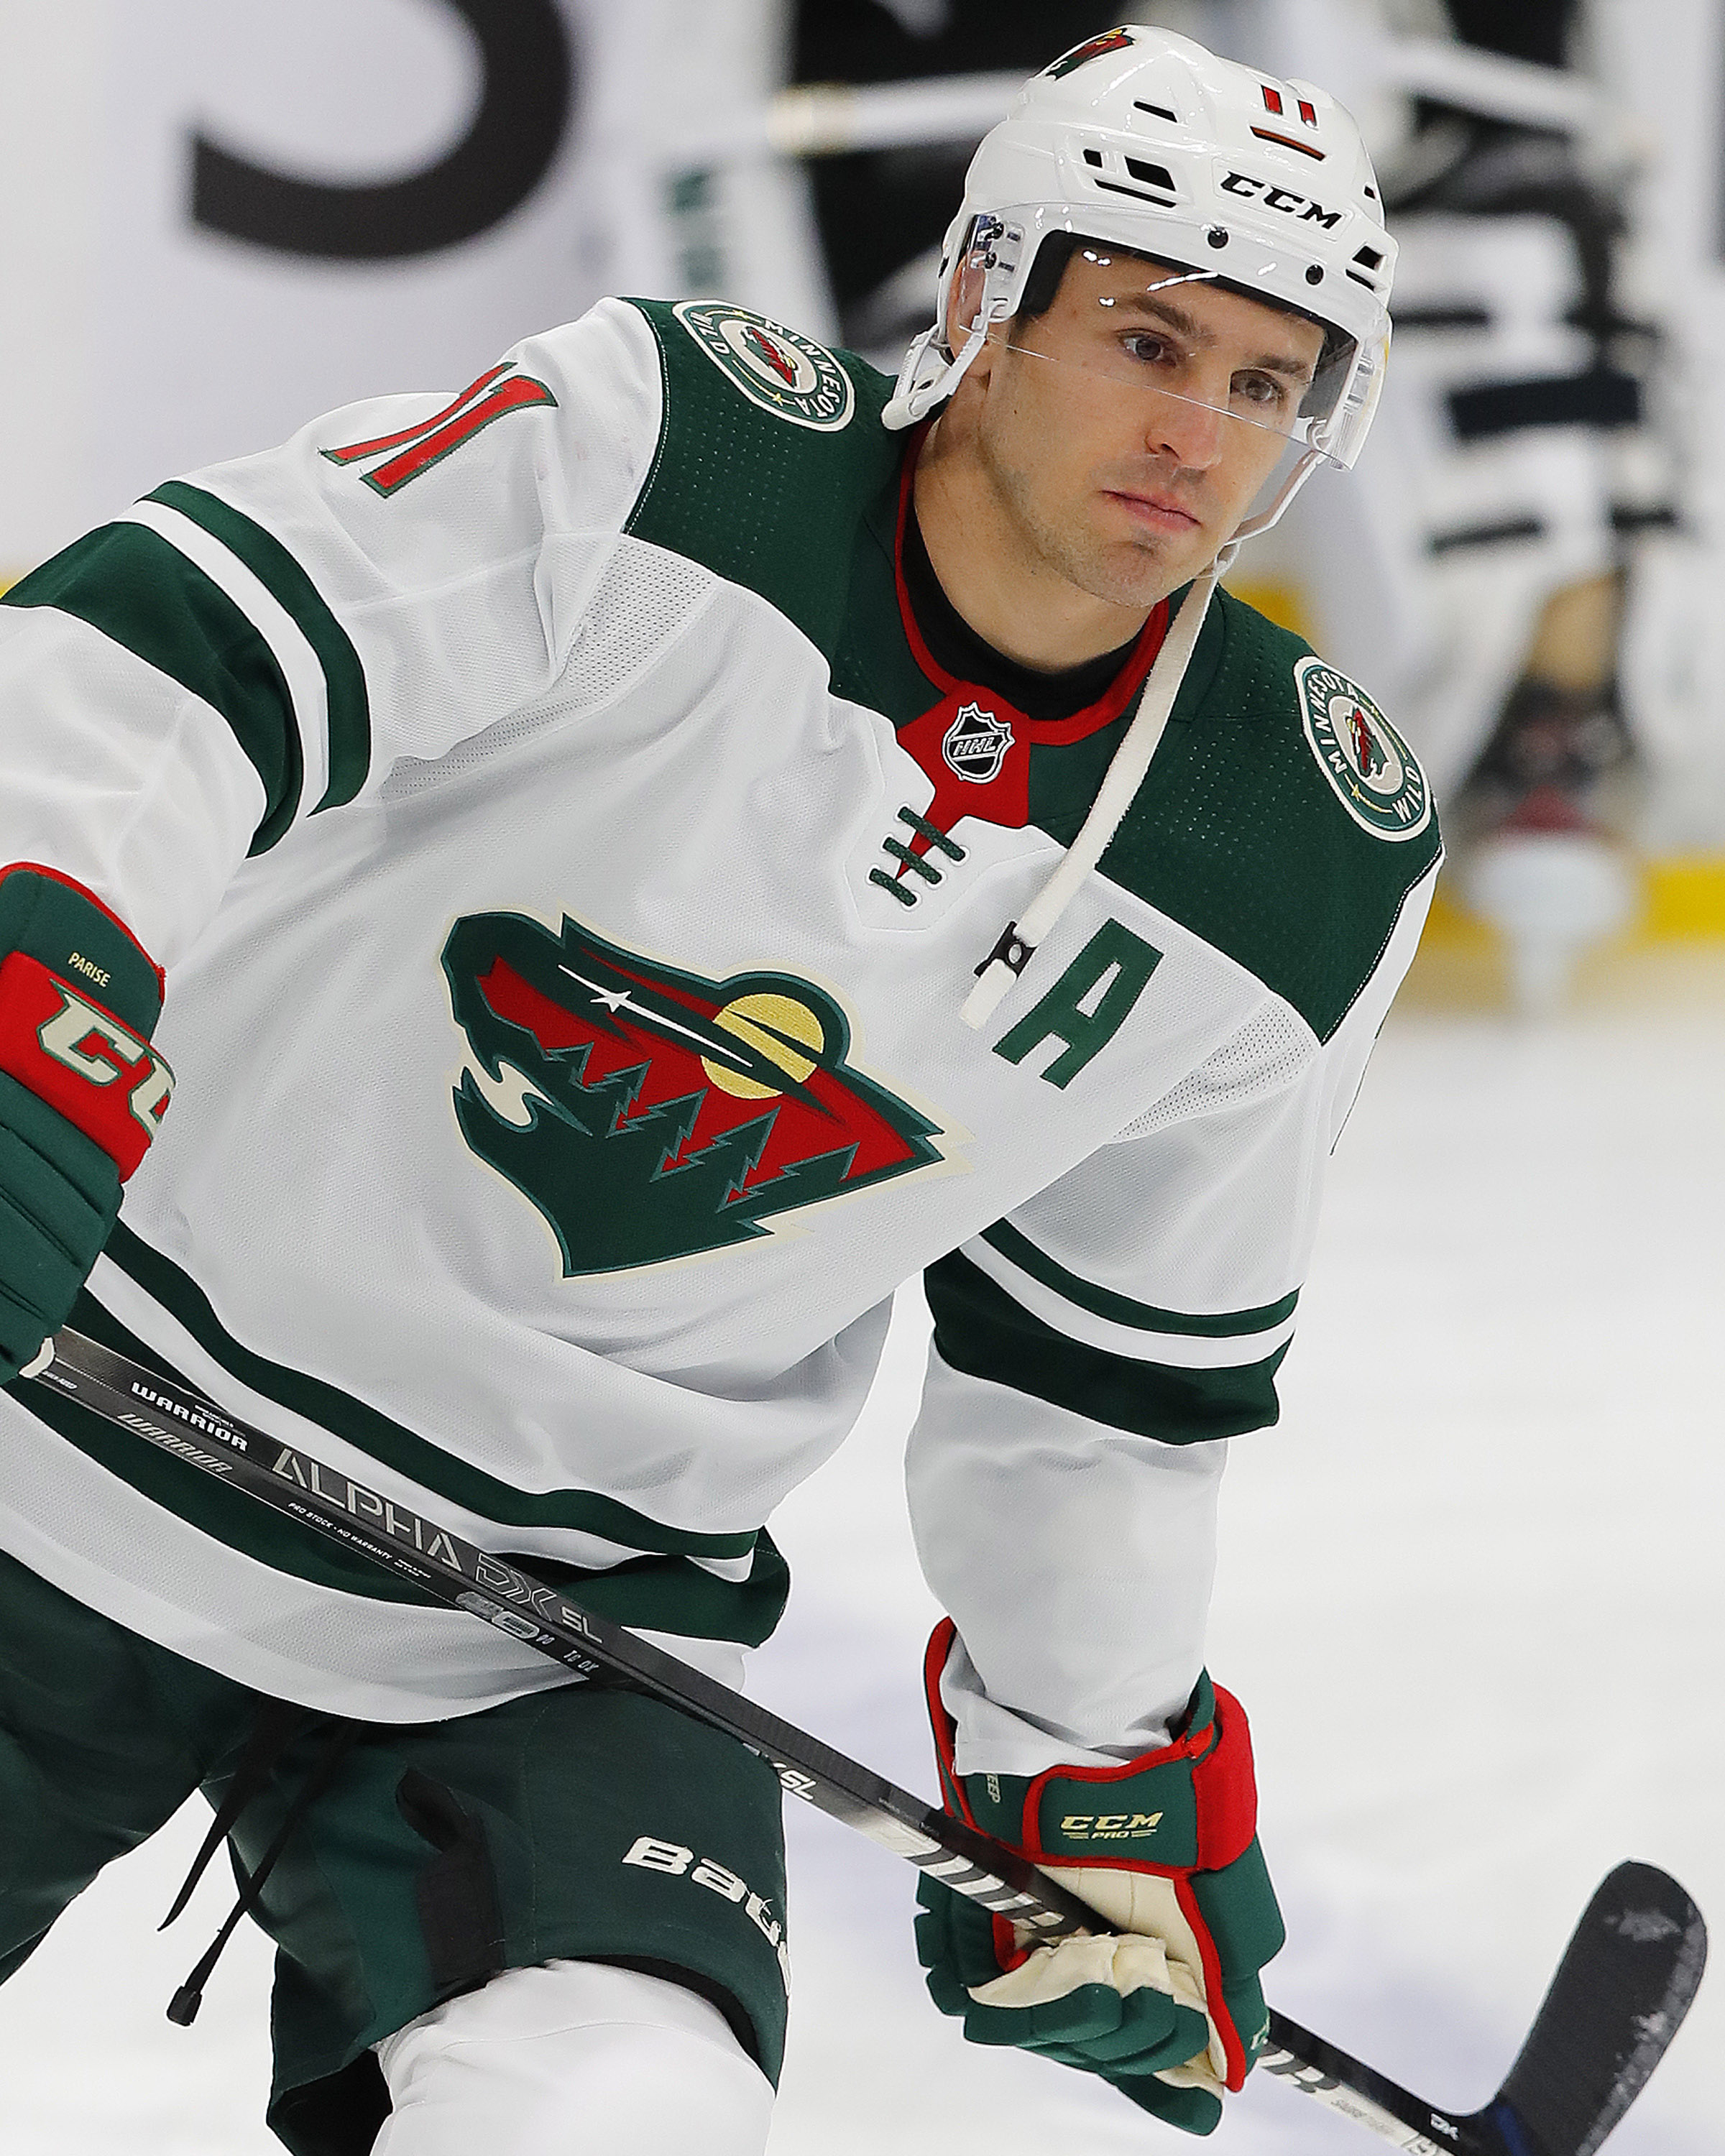 In N.H.L. Free Agency, Wild Sign Parise and Suter - The New York Times